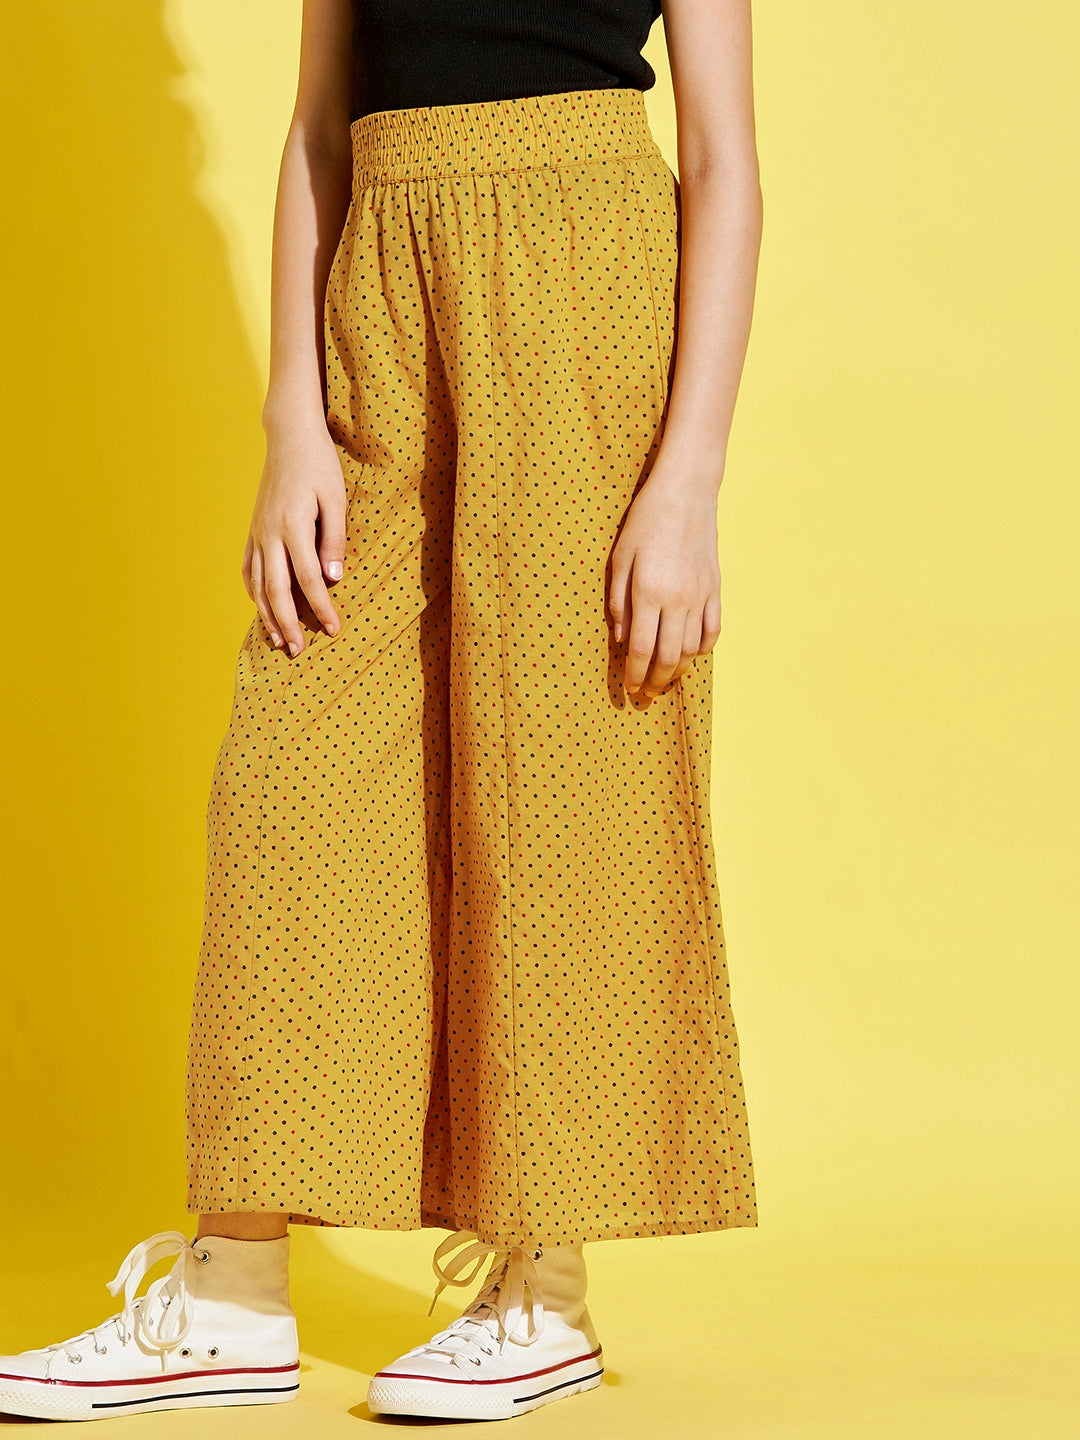 Cherry Jerry Girls Mustard Yellow Printed Relaxed cotton Trousers